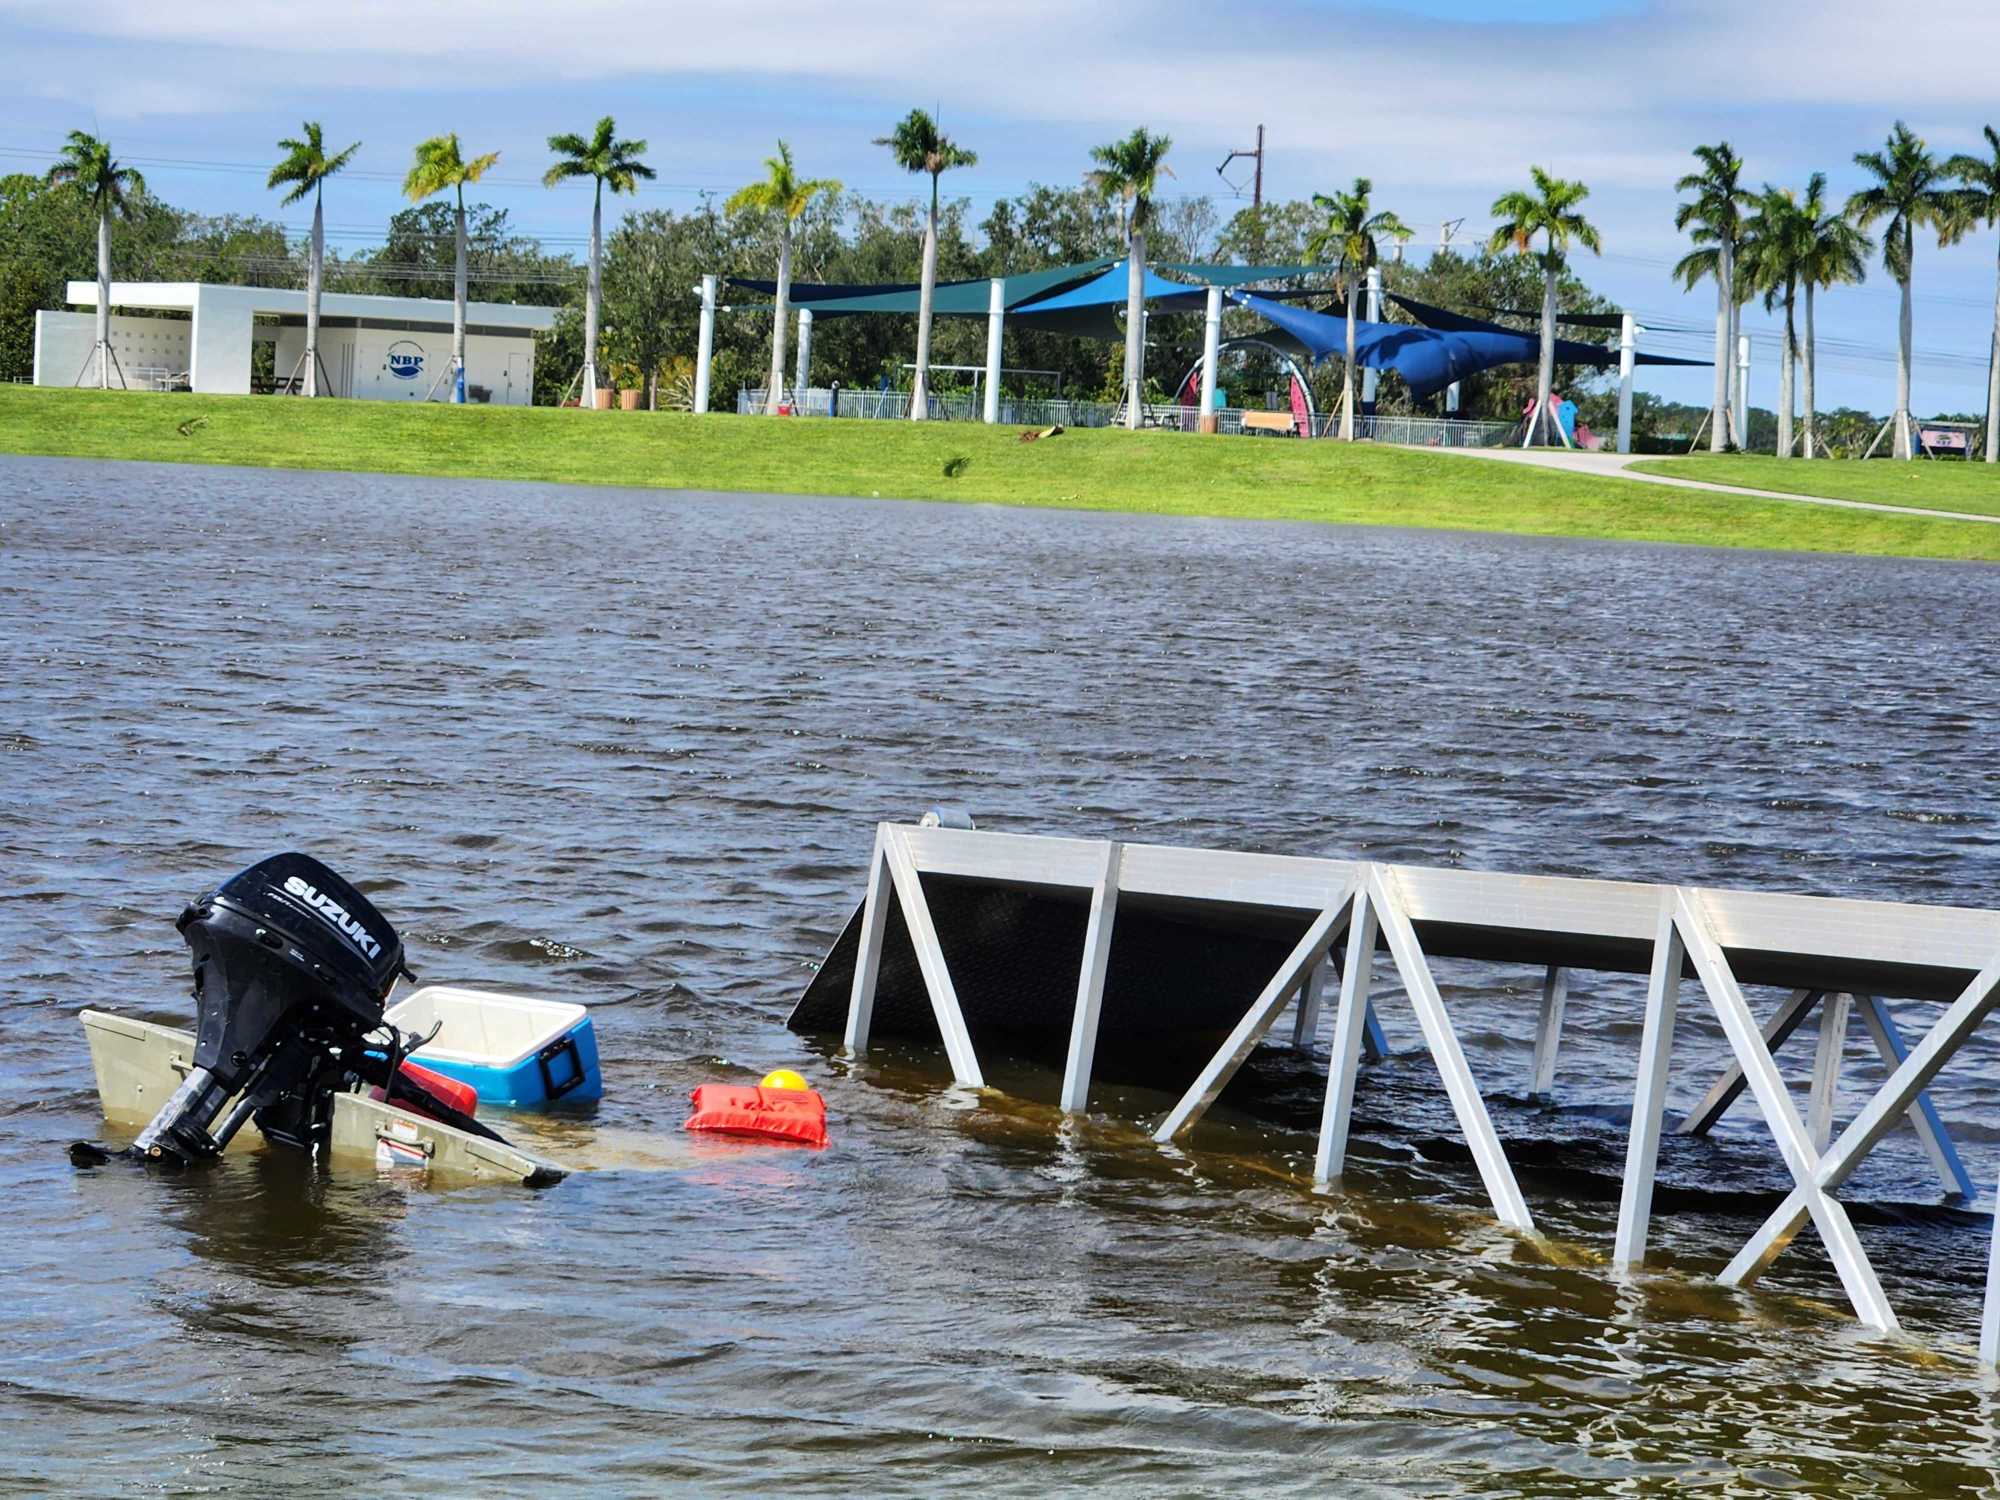 Land at Nathan Benderson Park surrounding the lake is seen flooded around 1:15 p.m. Thursday. (Photo by Andrew Warfield)